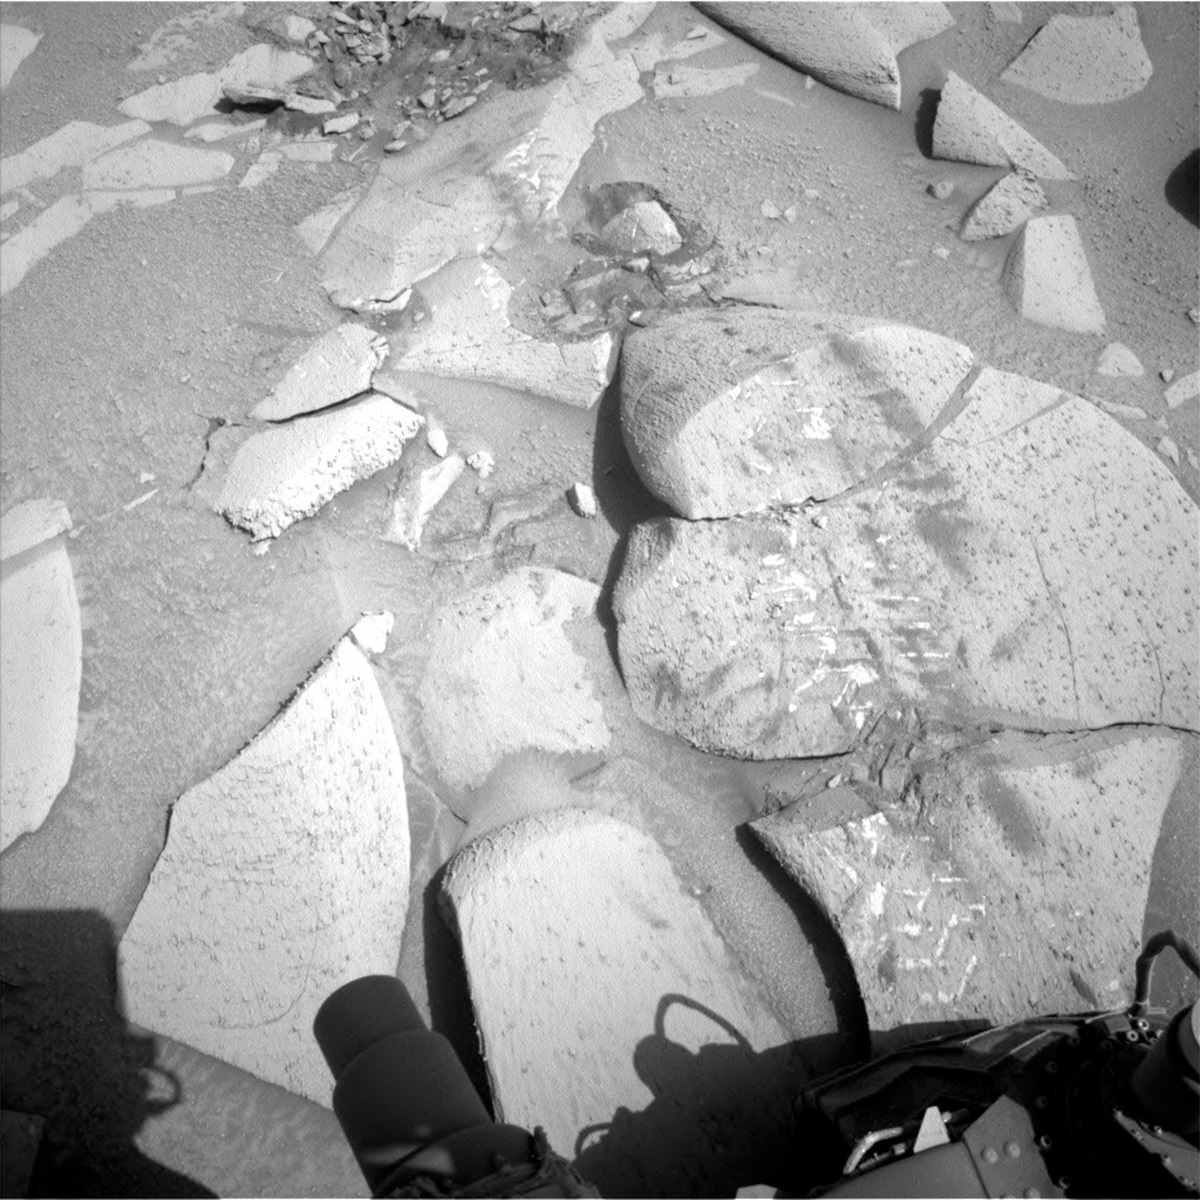 This image shows the scuffed bedrock and sand in the workspace including the “Pepejoe” target and was taken by Curiosity's Navcam on Sol 3803.